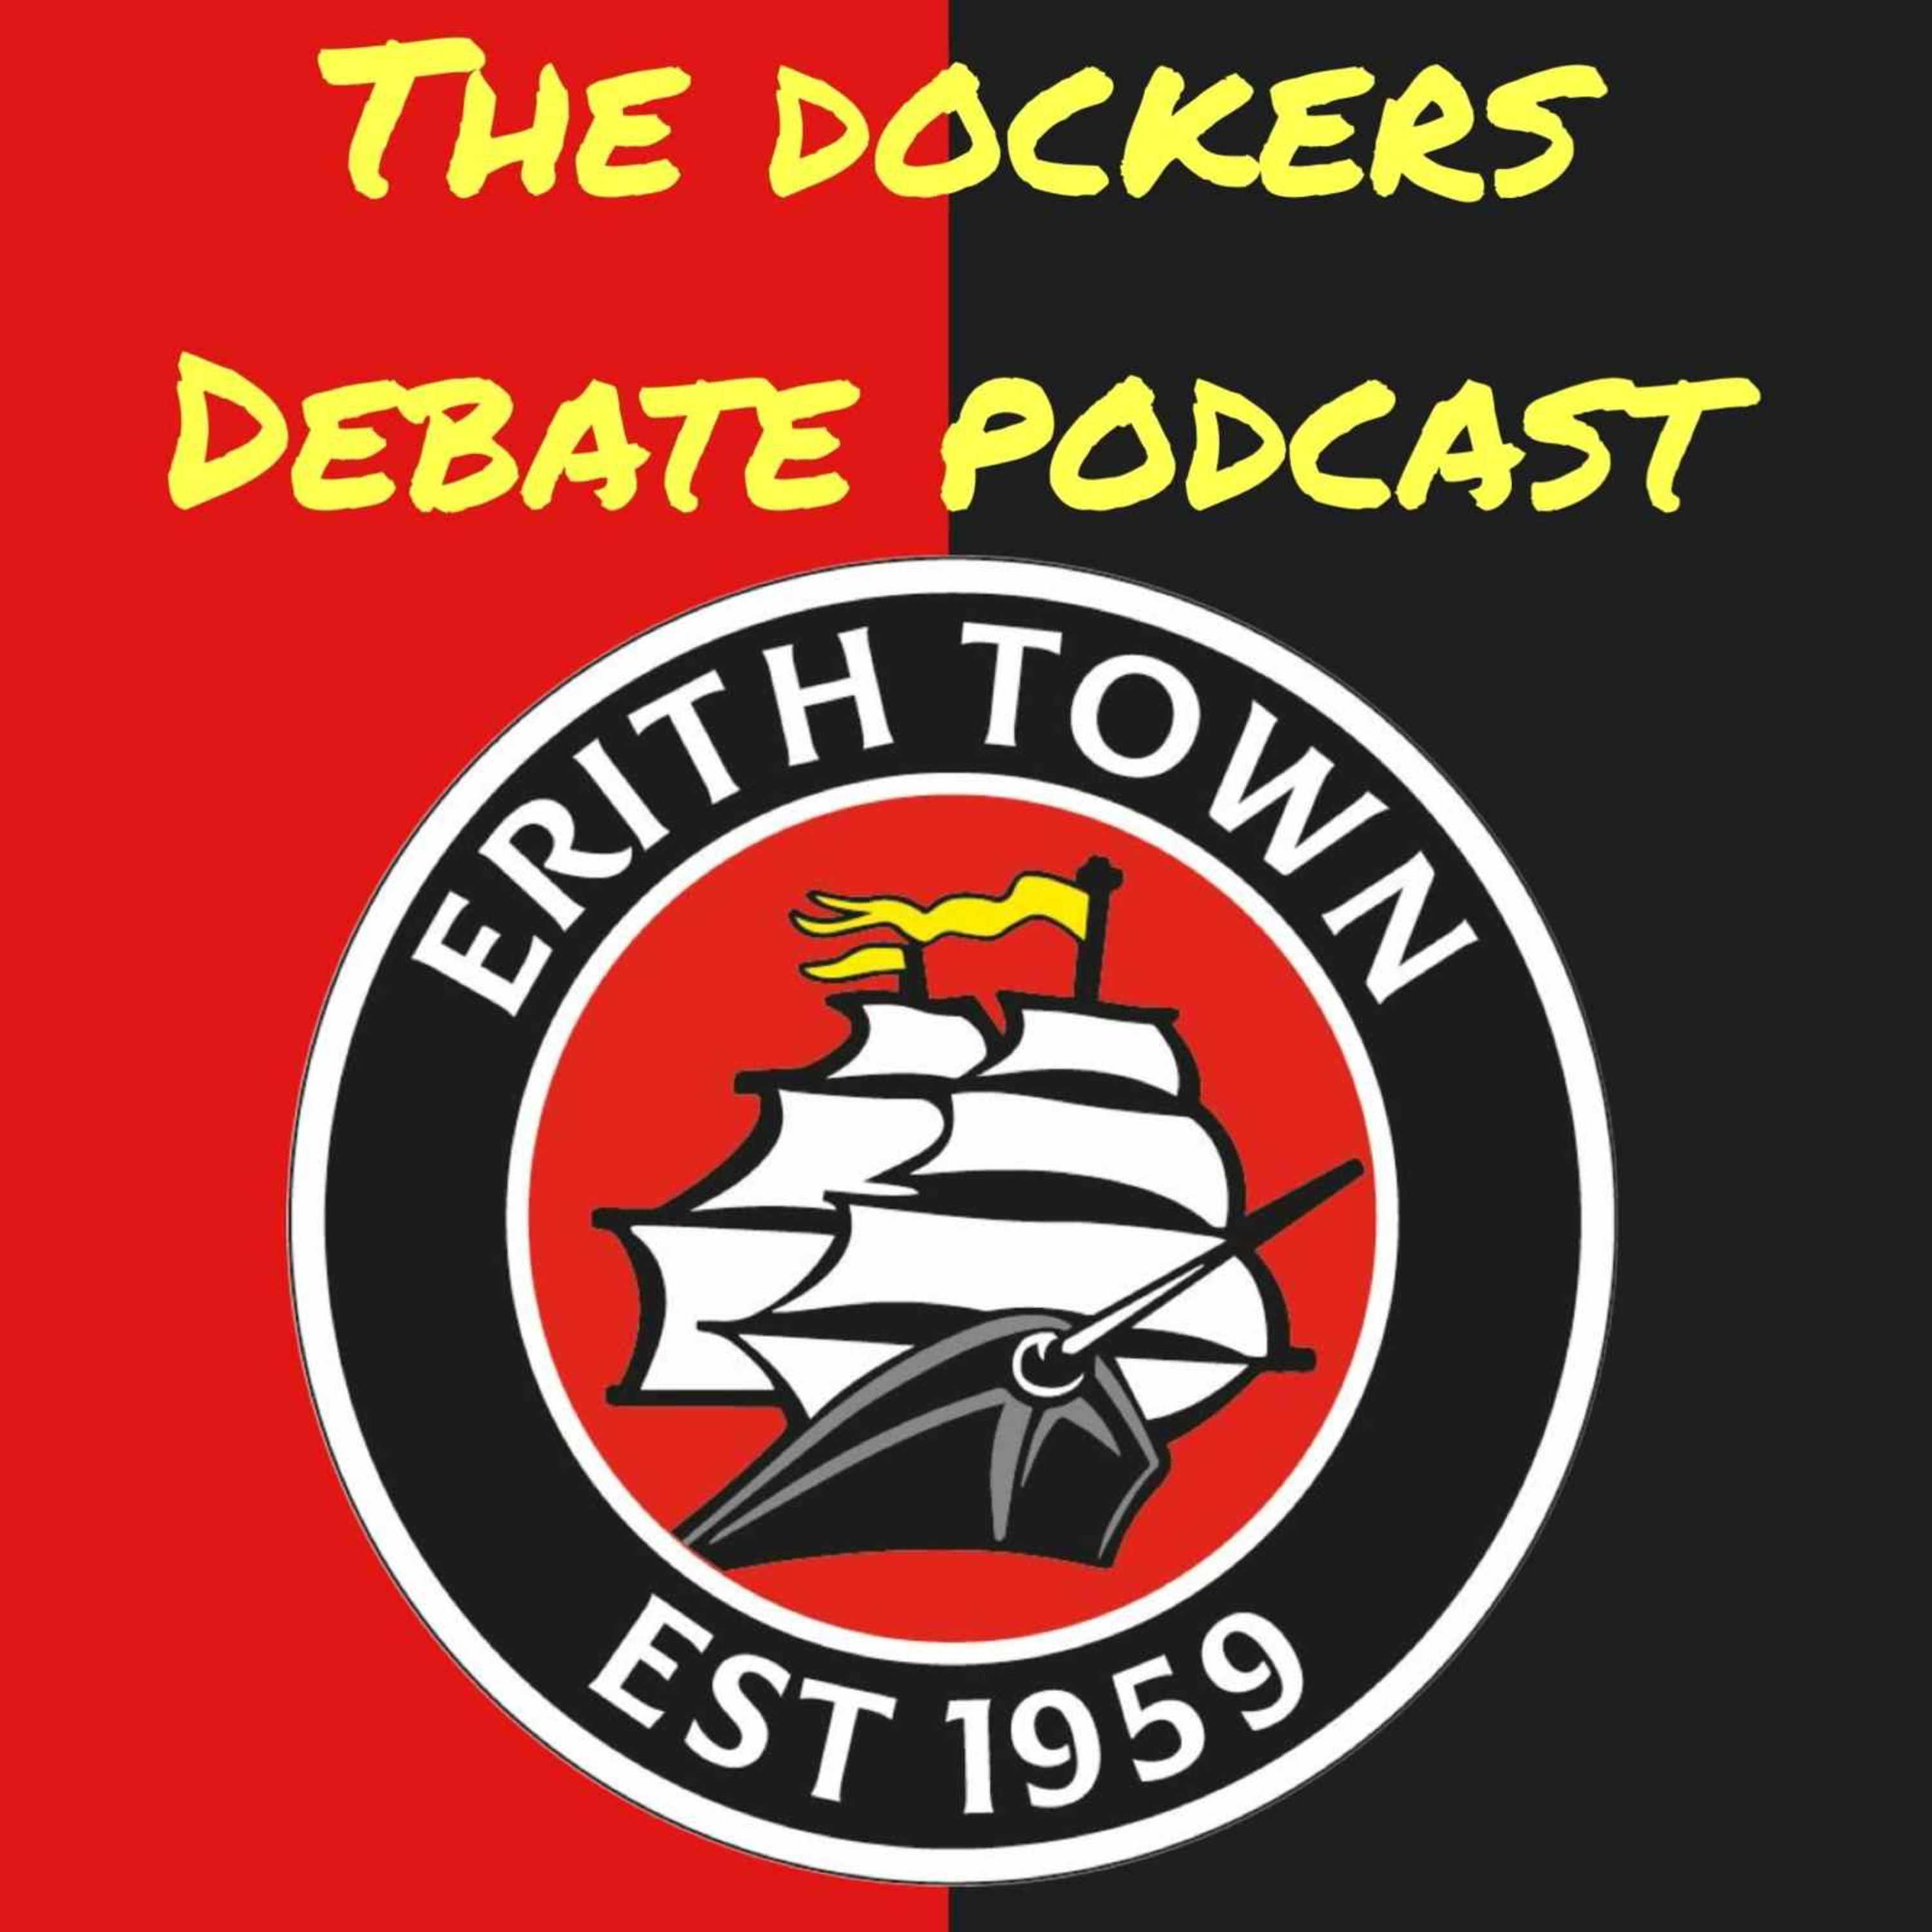 Erith Town FC: 'The Dockers Debate Podcast' - The MacKenzie Foley interview